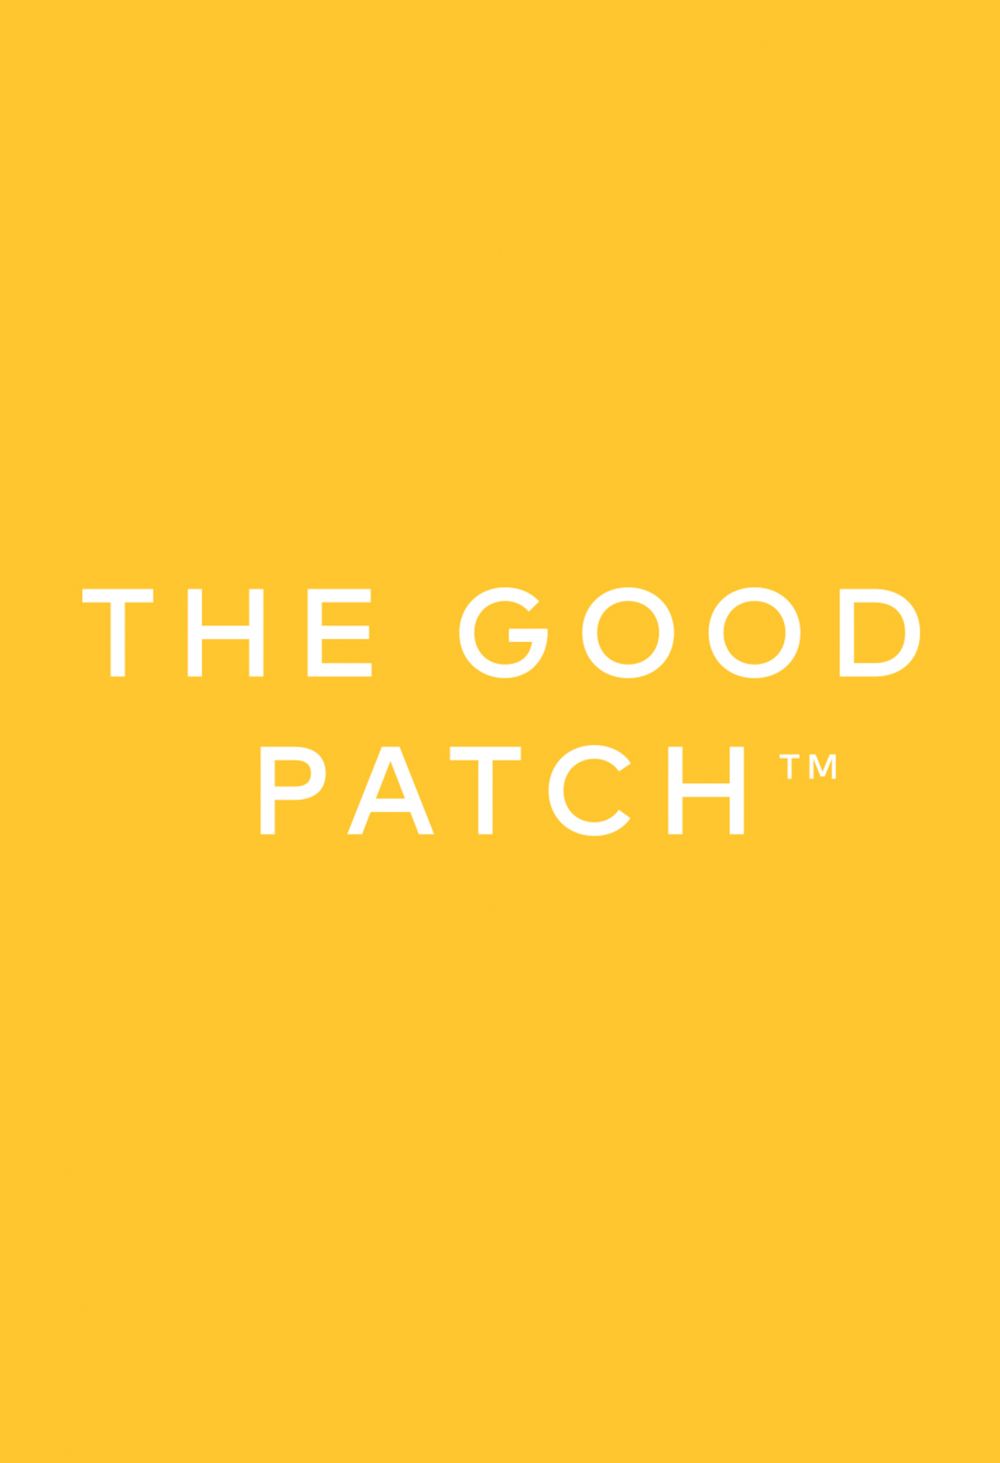 THE GOOD PATCH